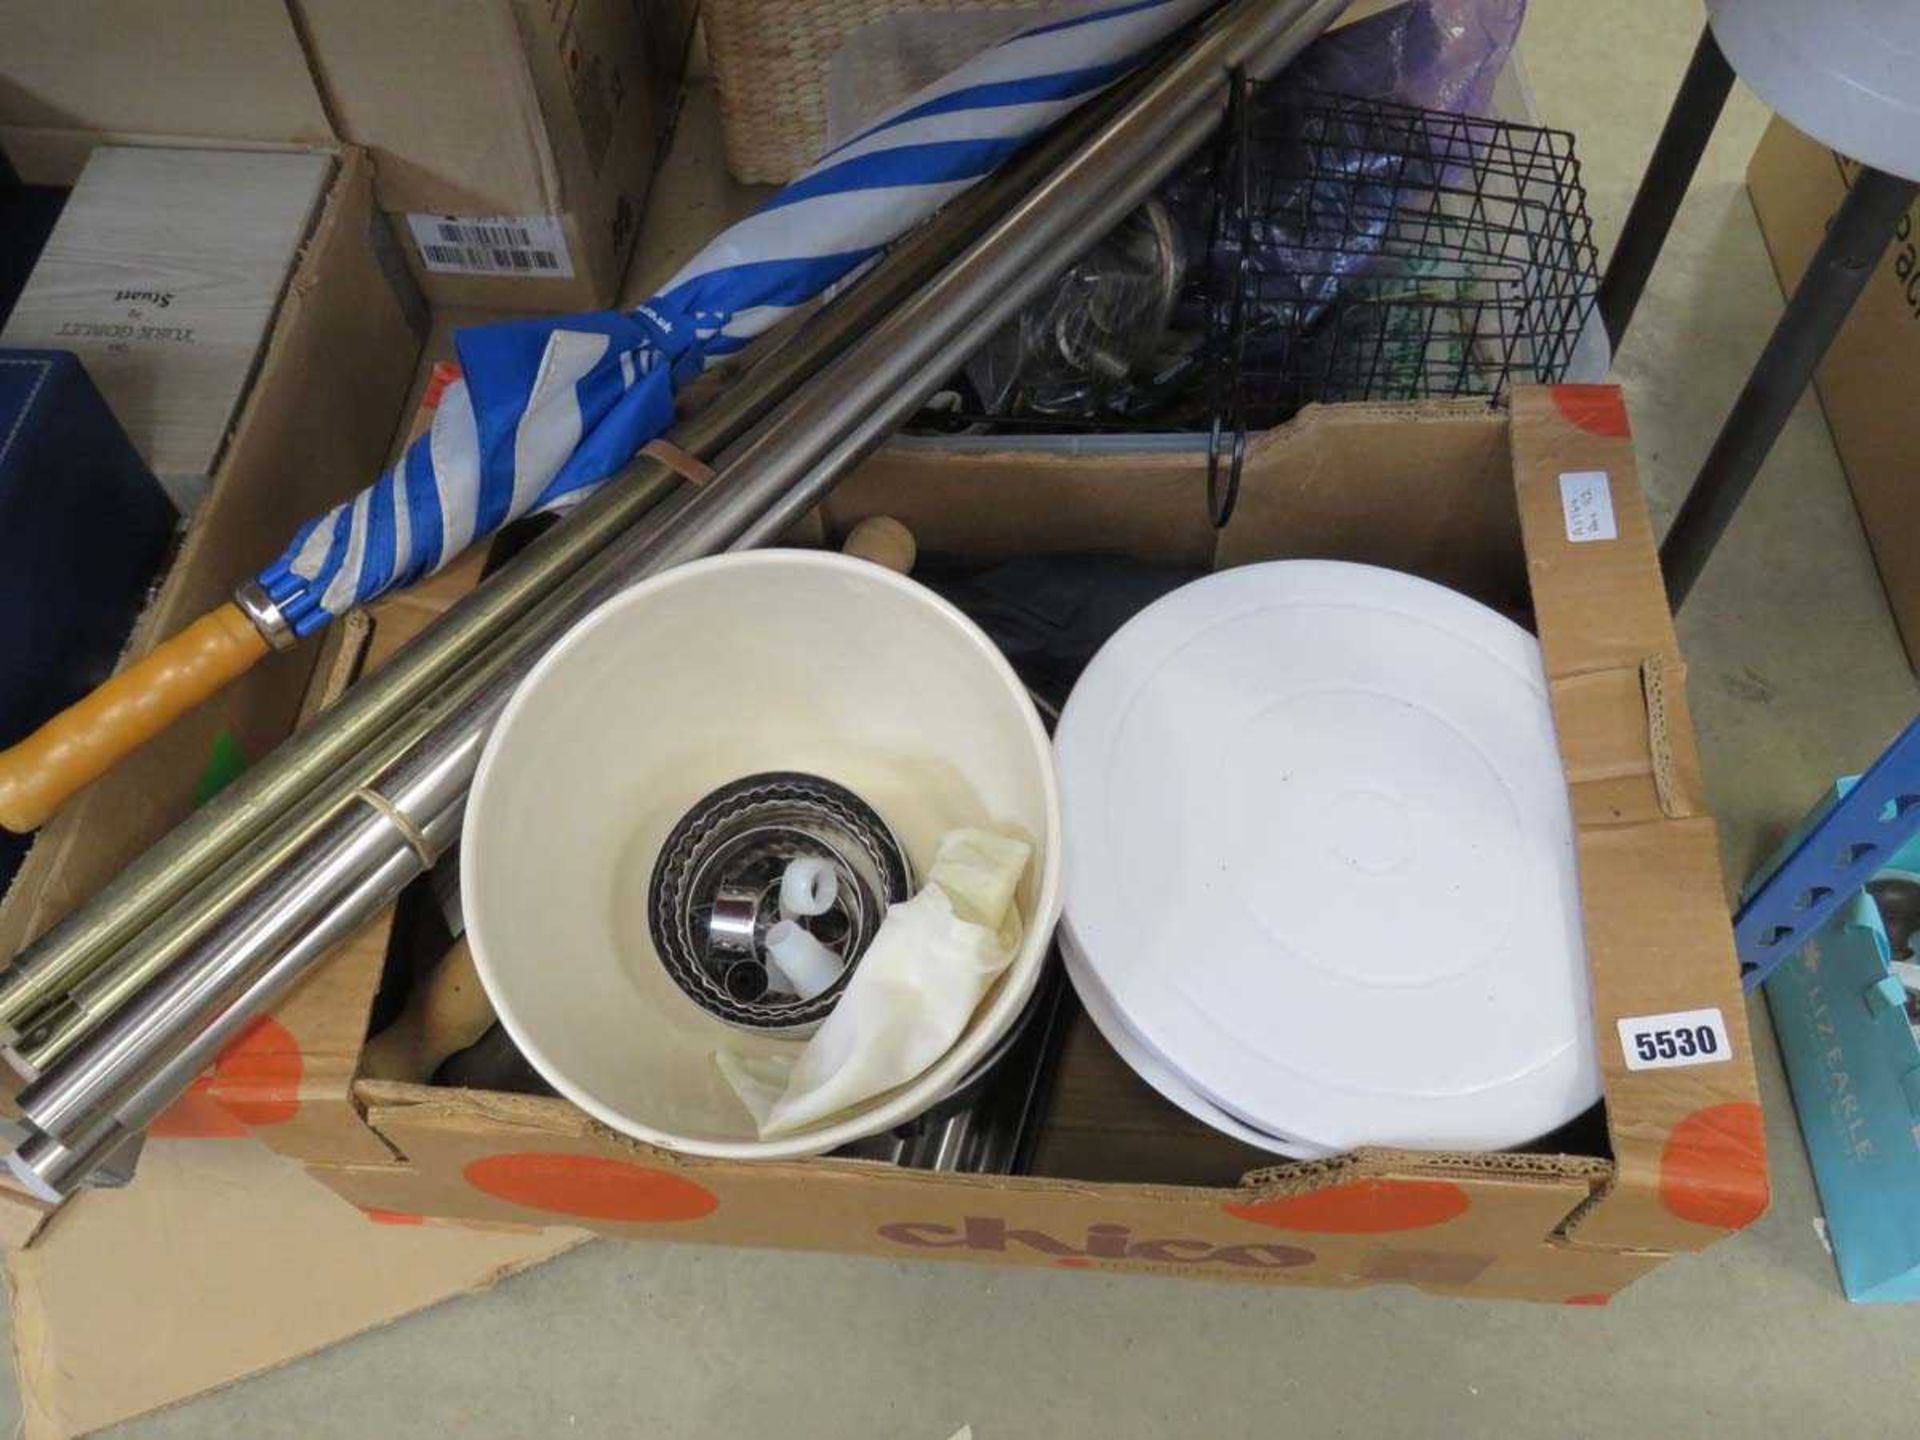 2 boxes containing mixing bowls, curtain rails, umbrella and other household goods